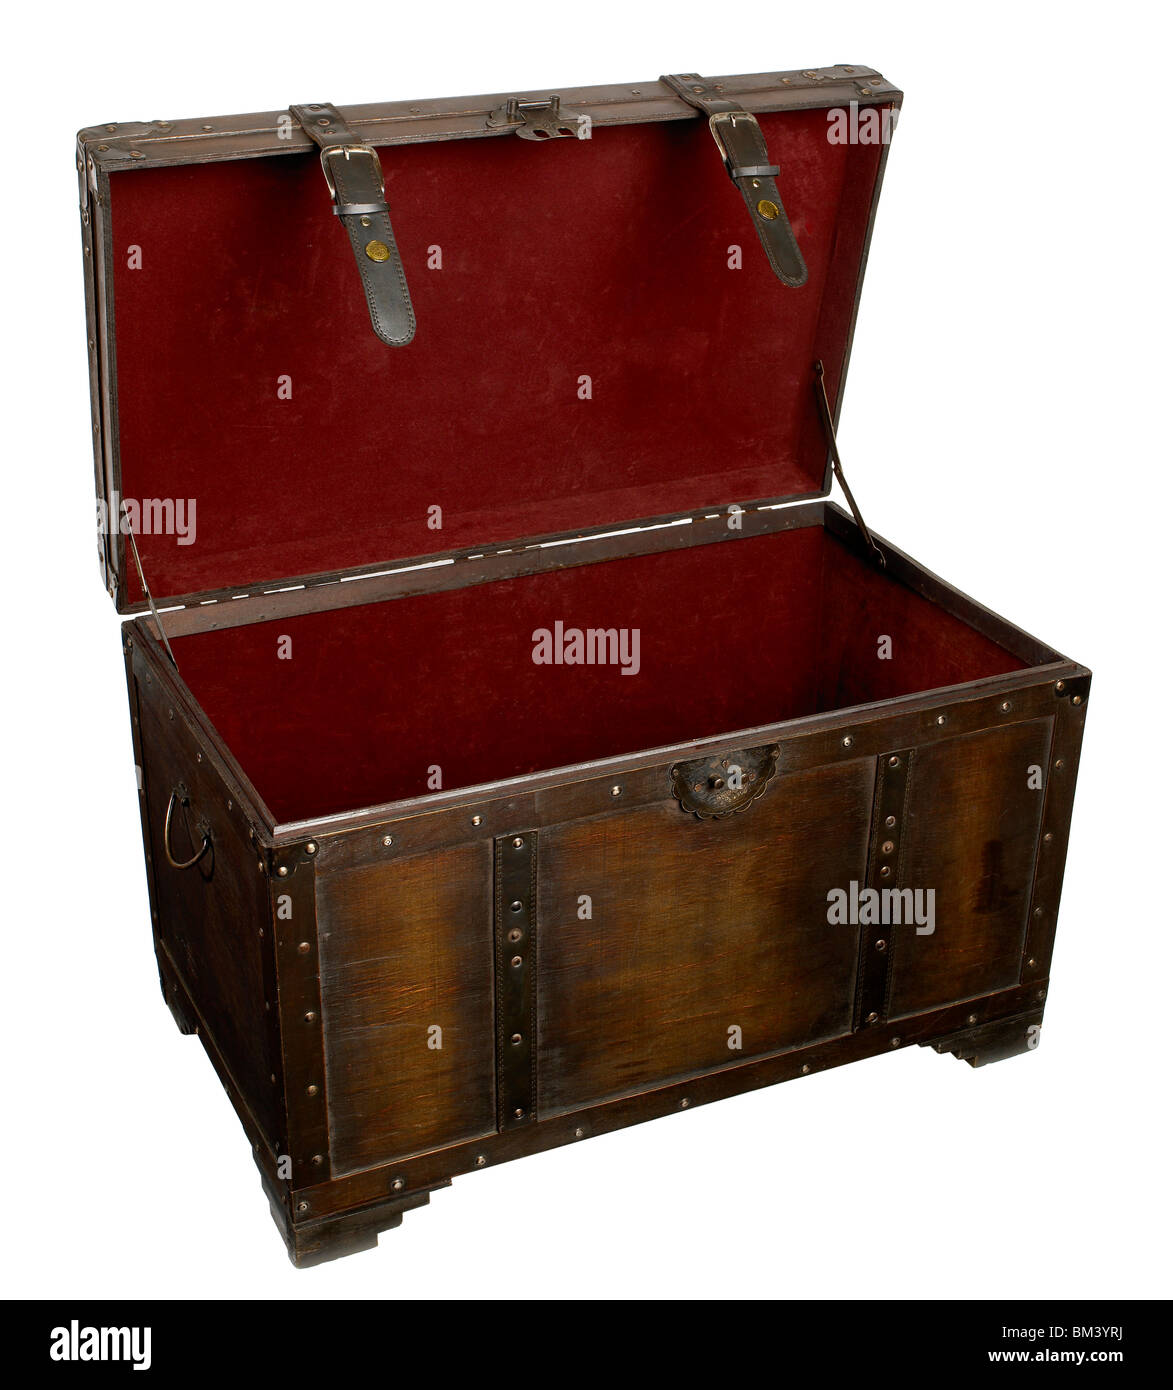 Wooden Trunk Stock Photo